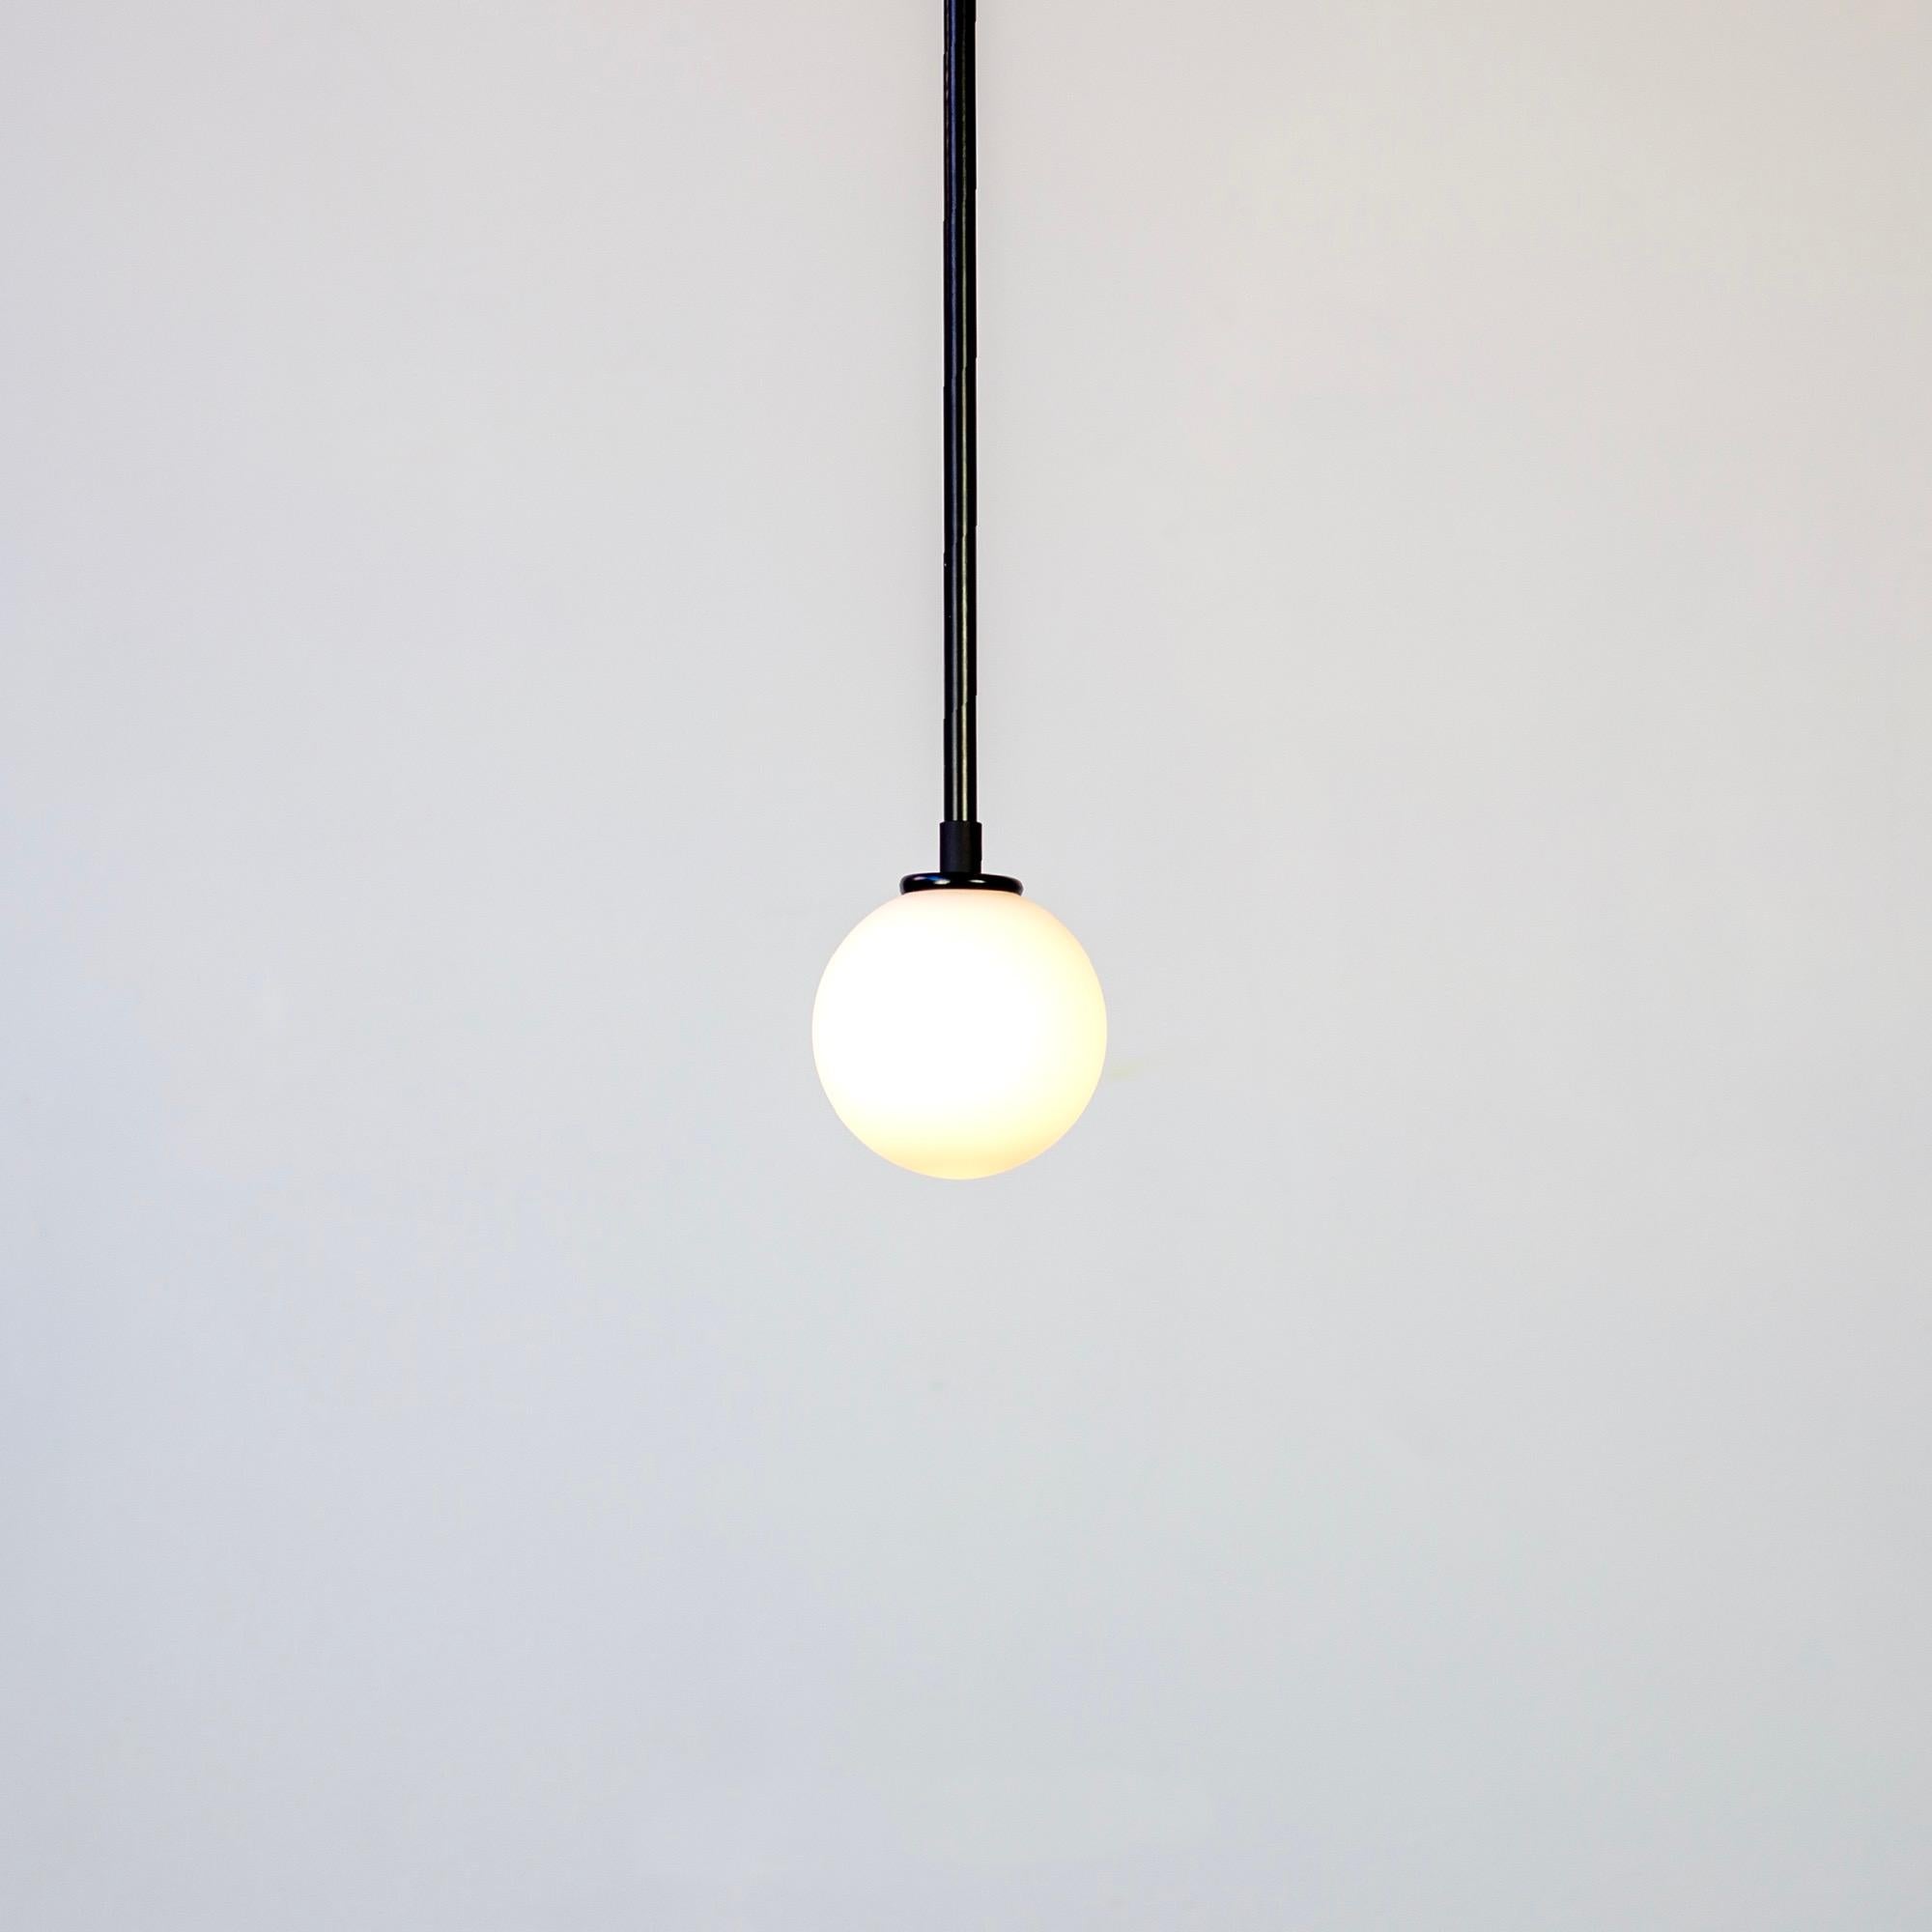 This listing is for 1x Ball Pendant in Black designed and manufactured by Research.Lighting.

Materials: Steel & Glass
Finish: Powder Coated Steel in black
Electronics: 1x G9 Socket, 4.5 Watt LED Bulb (included), 450 Lumens
Suspension: 5